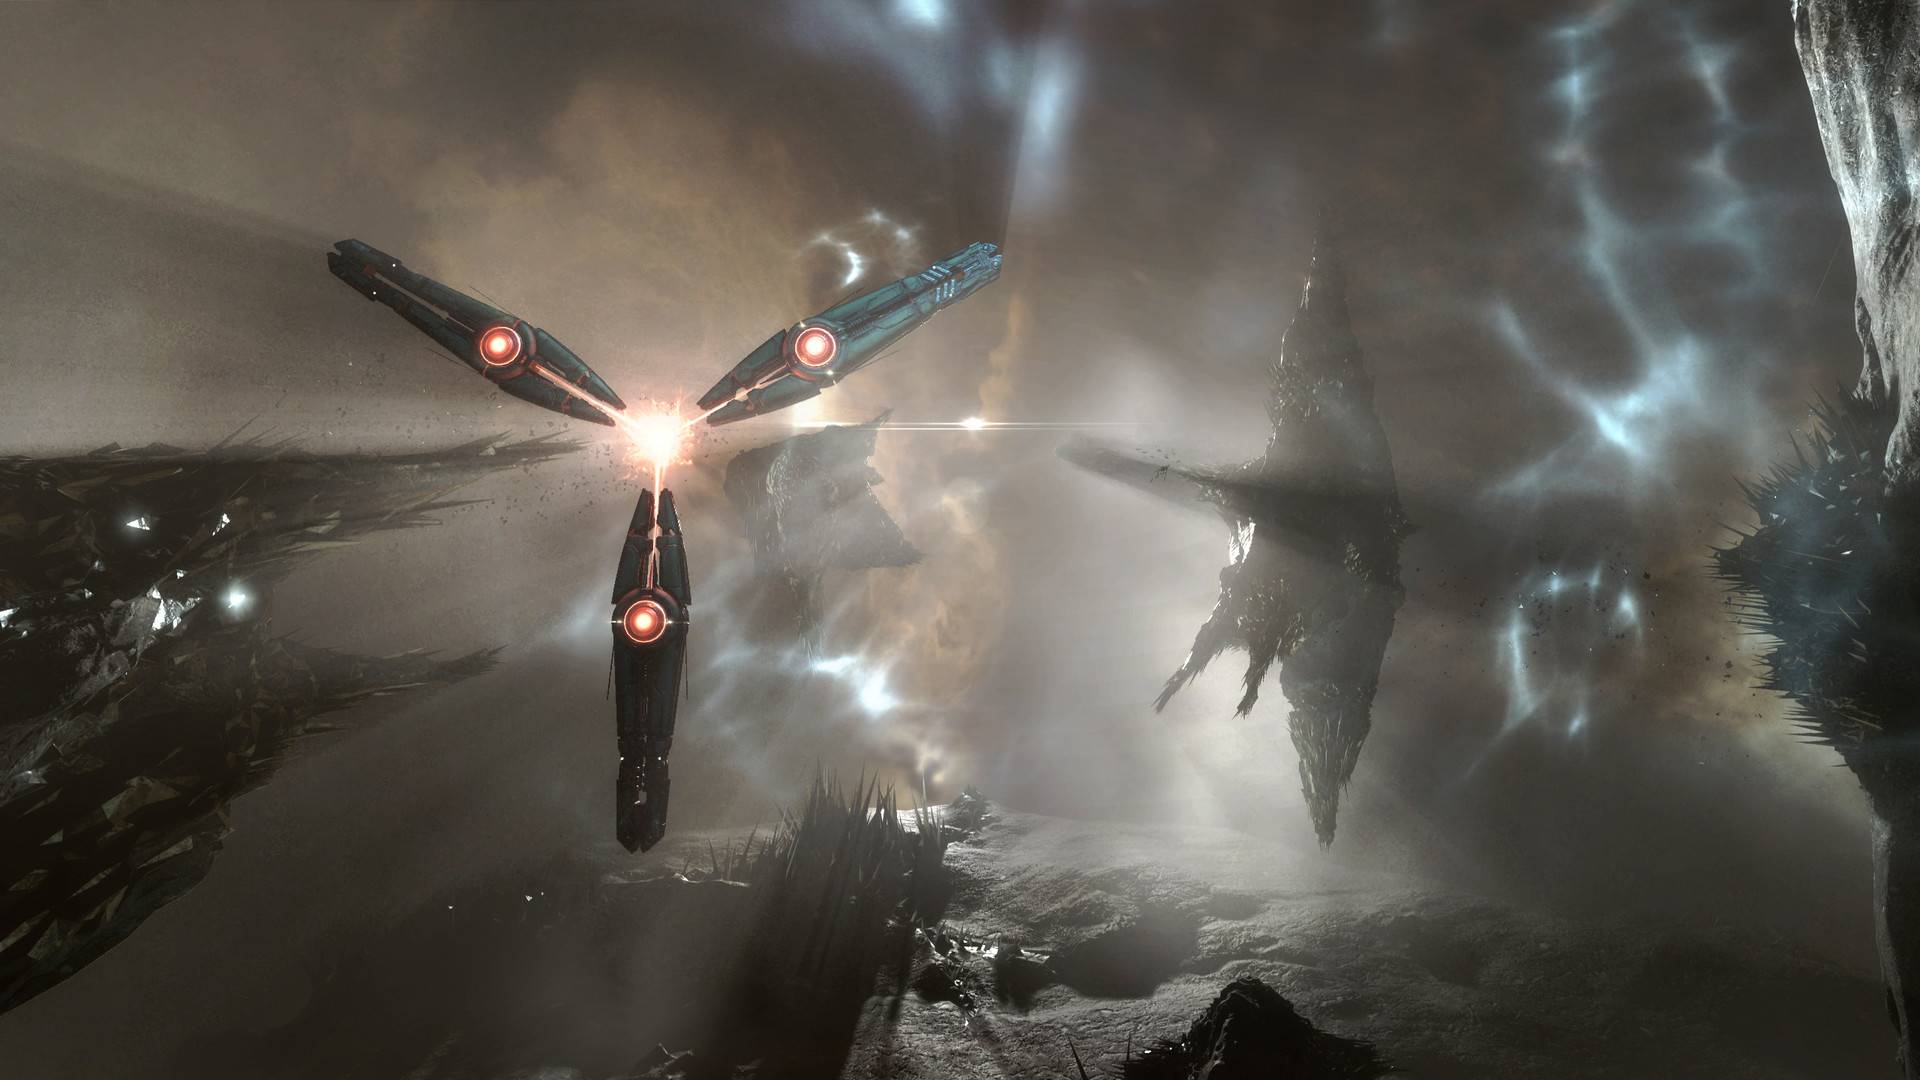 Best MMORPG games: EVE Online. Image shows otherworldly ships flying through space.